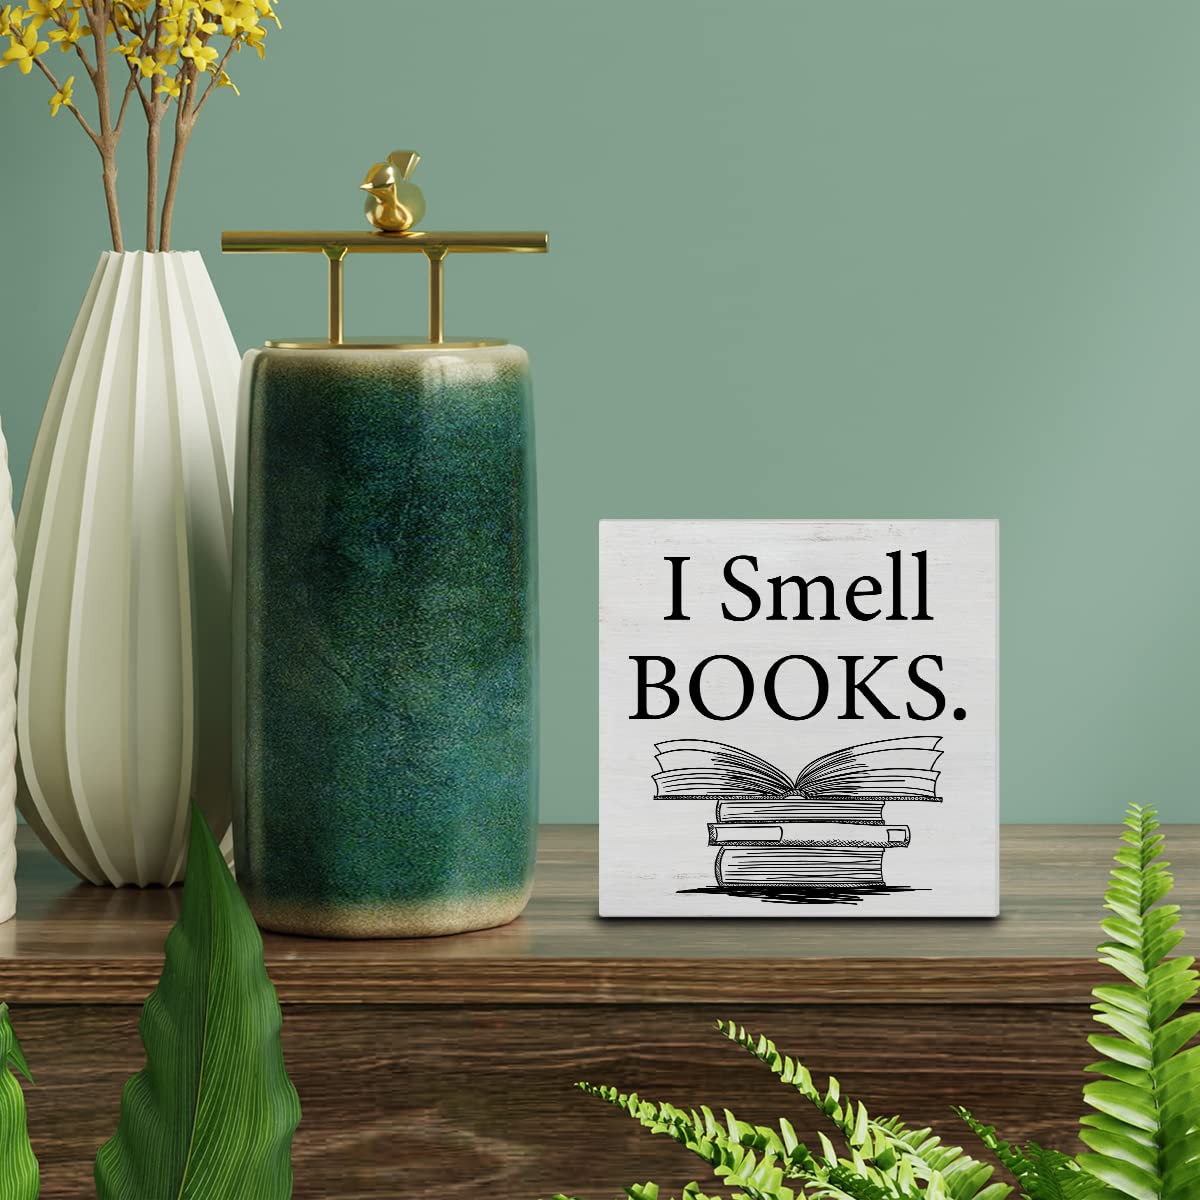 YIDOU Book Lover Saying Wood Box Sign Decor Desk Sign I Smell Books Wooden Box Block Sign Rustic Home Library Shelf Wall Decoration